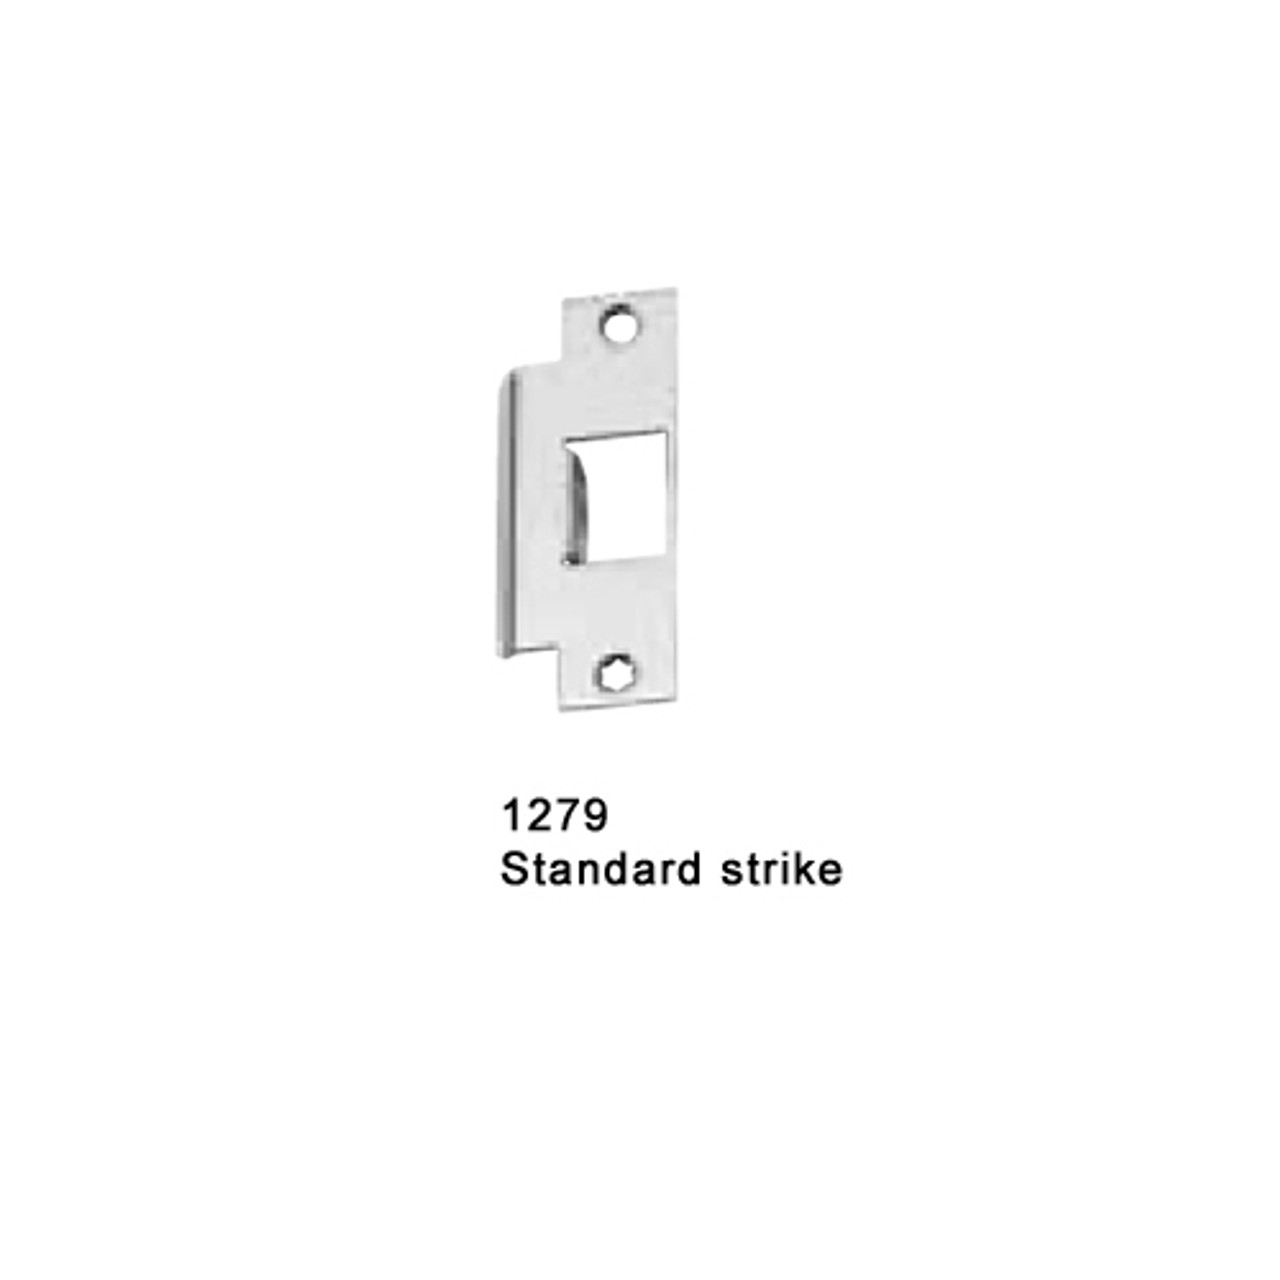 F-25-M-L-Dane-US32D-3-RHR Falcon 25 Series Fire Rated Mortise Lock Devices with 510L Dane Lever Trim in Satin Stainless Steel